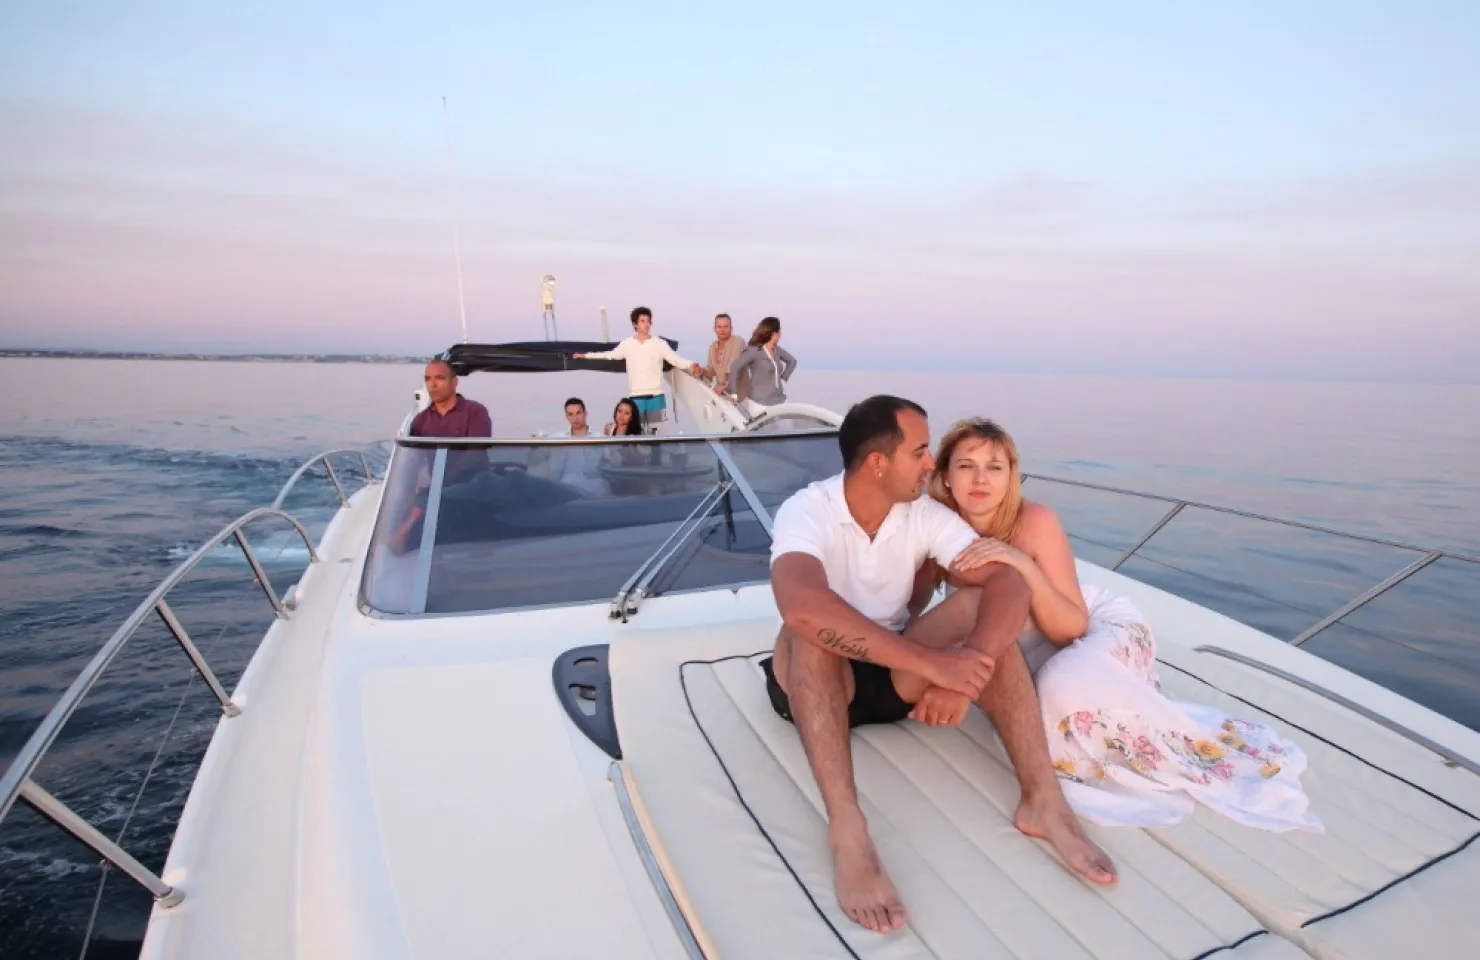 Luxury Sunset Cruise - Algarve Boat Trips and Tours - 